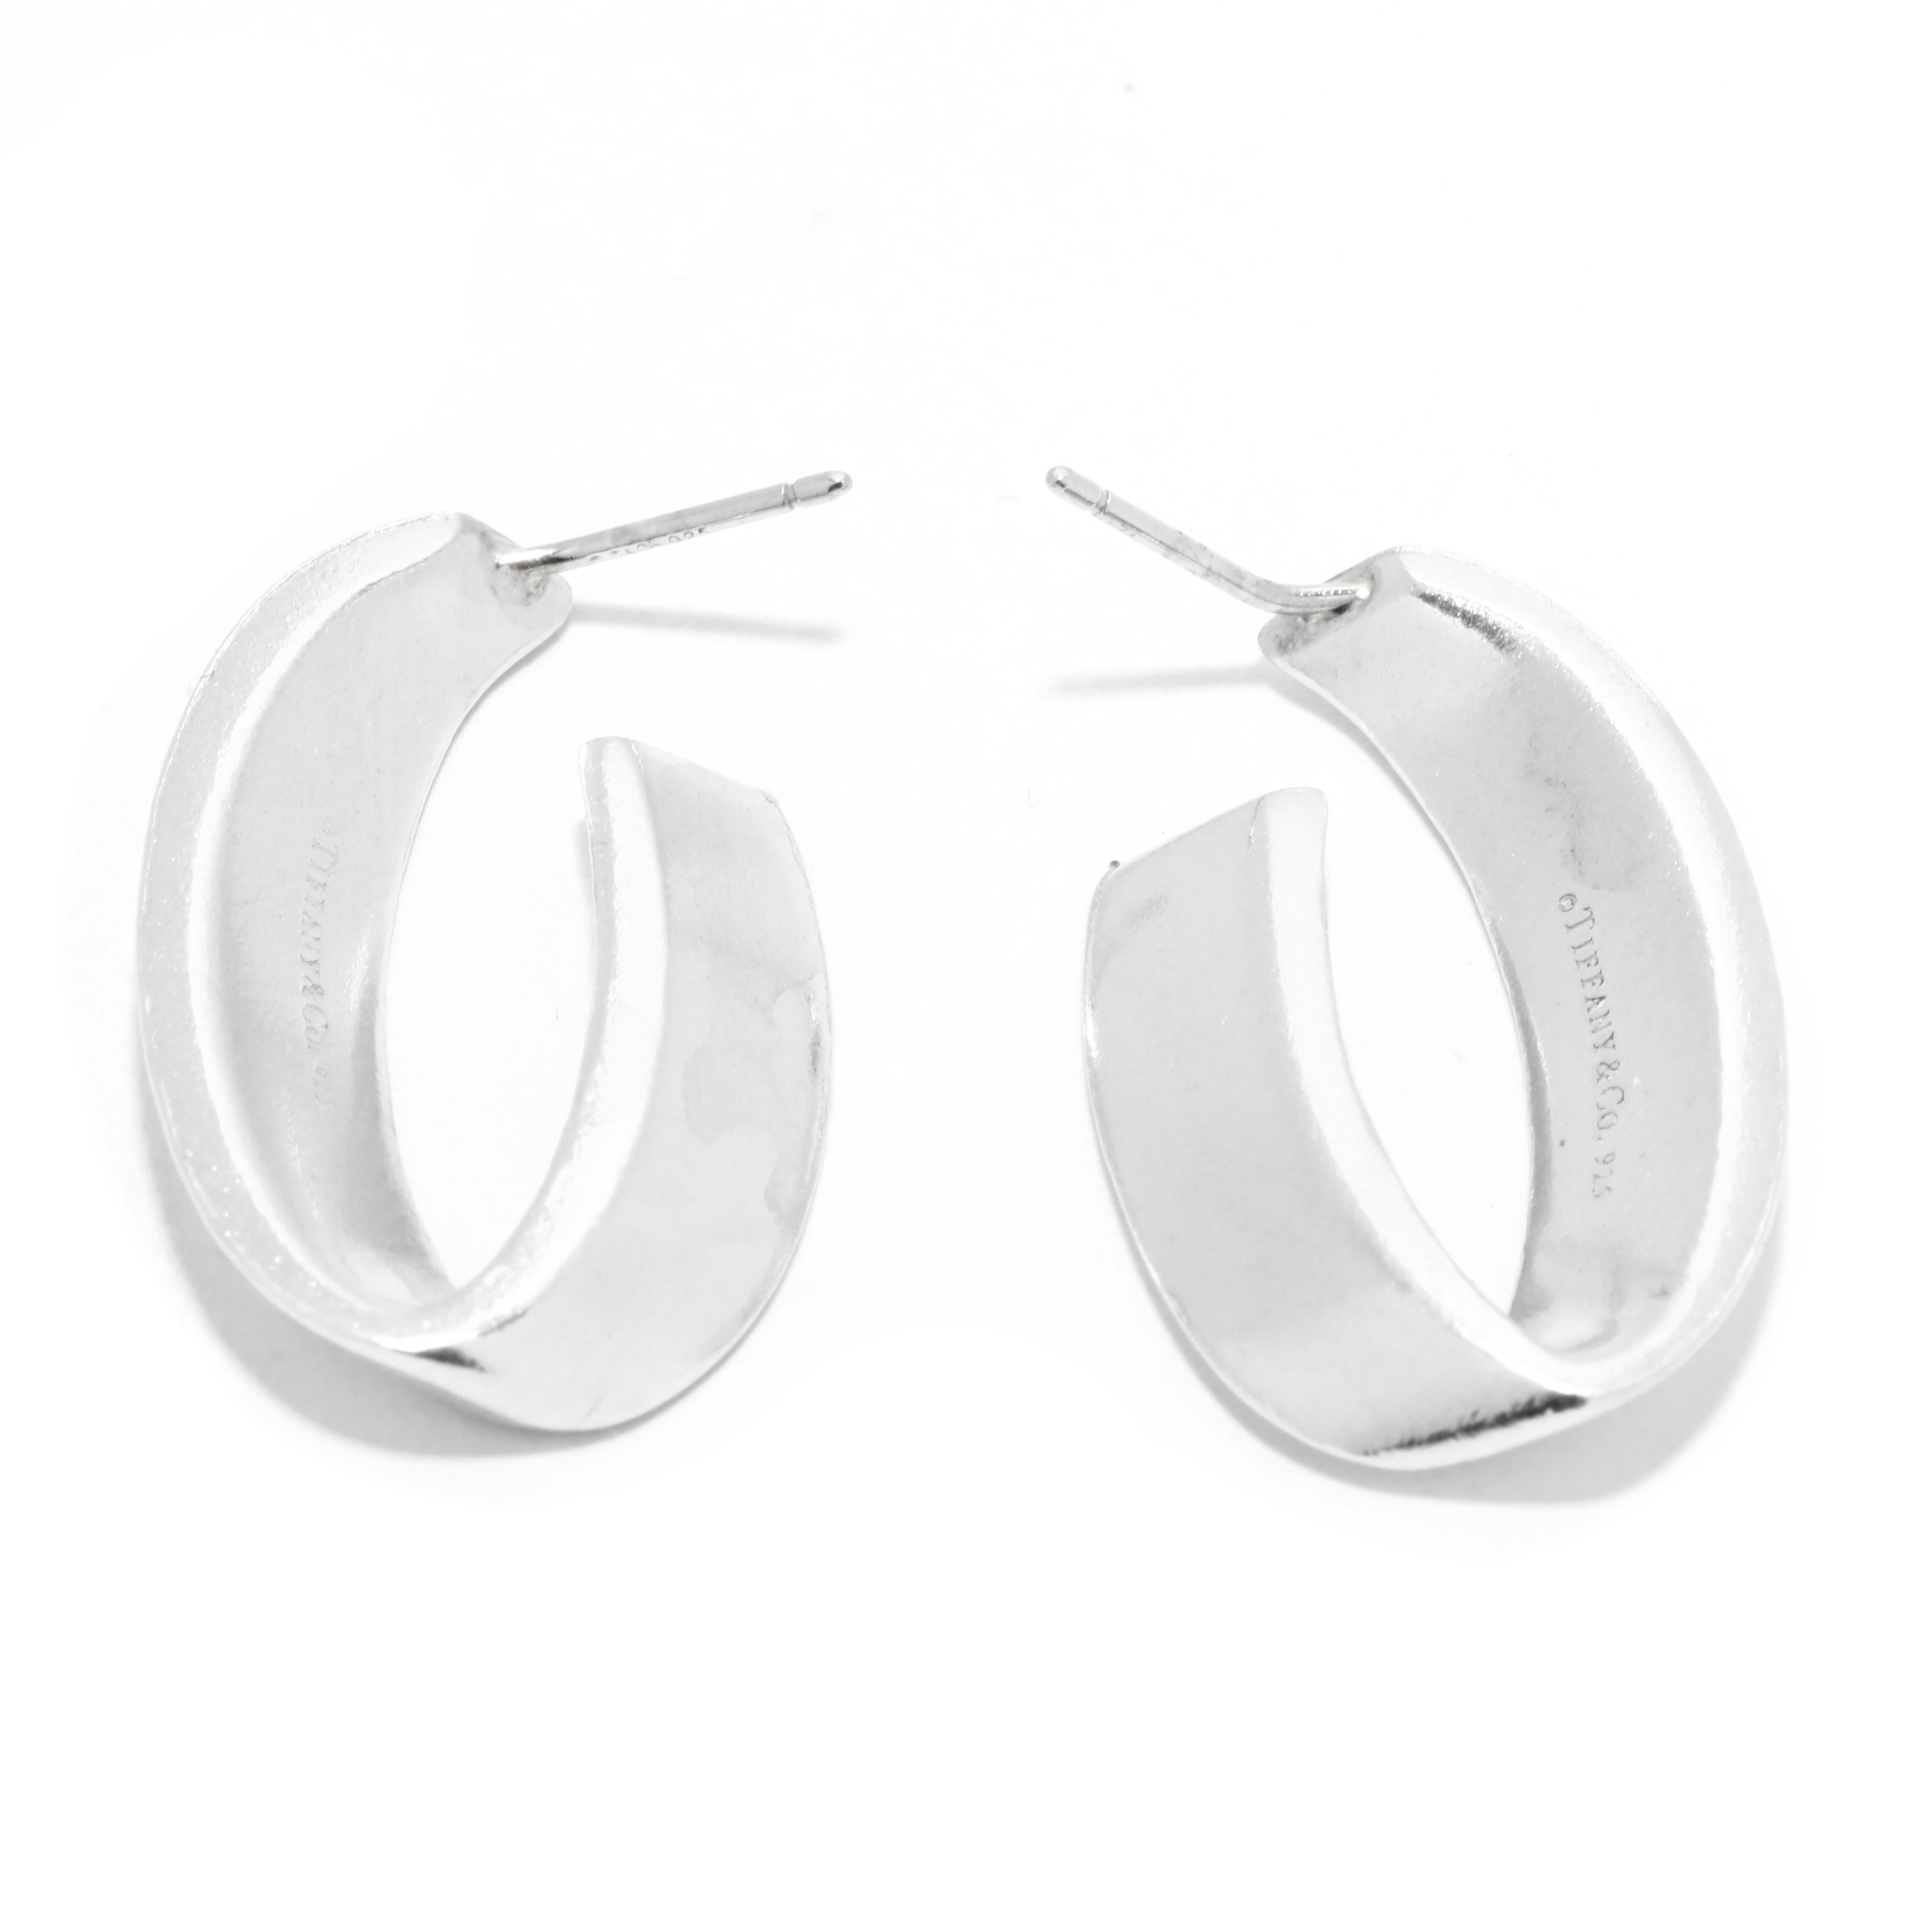 A pair of vintage sterling silver hoop earrings by Tiffany and Company. This everyday hoops feature a flat 'V' shape design with pierced pushbacks.

Length: 1 in.

Width: 5/8 in.

Weight: 4.8 dwts. / 7.5 grams

Stamps: TIFFANY & CO 925

Ring Sizings